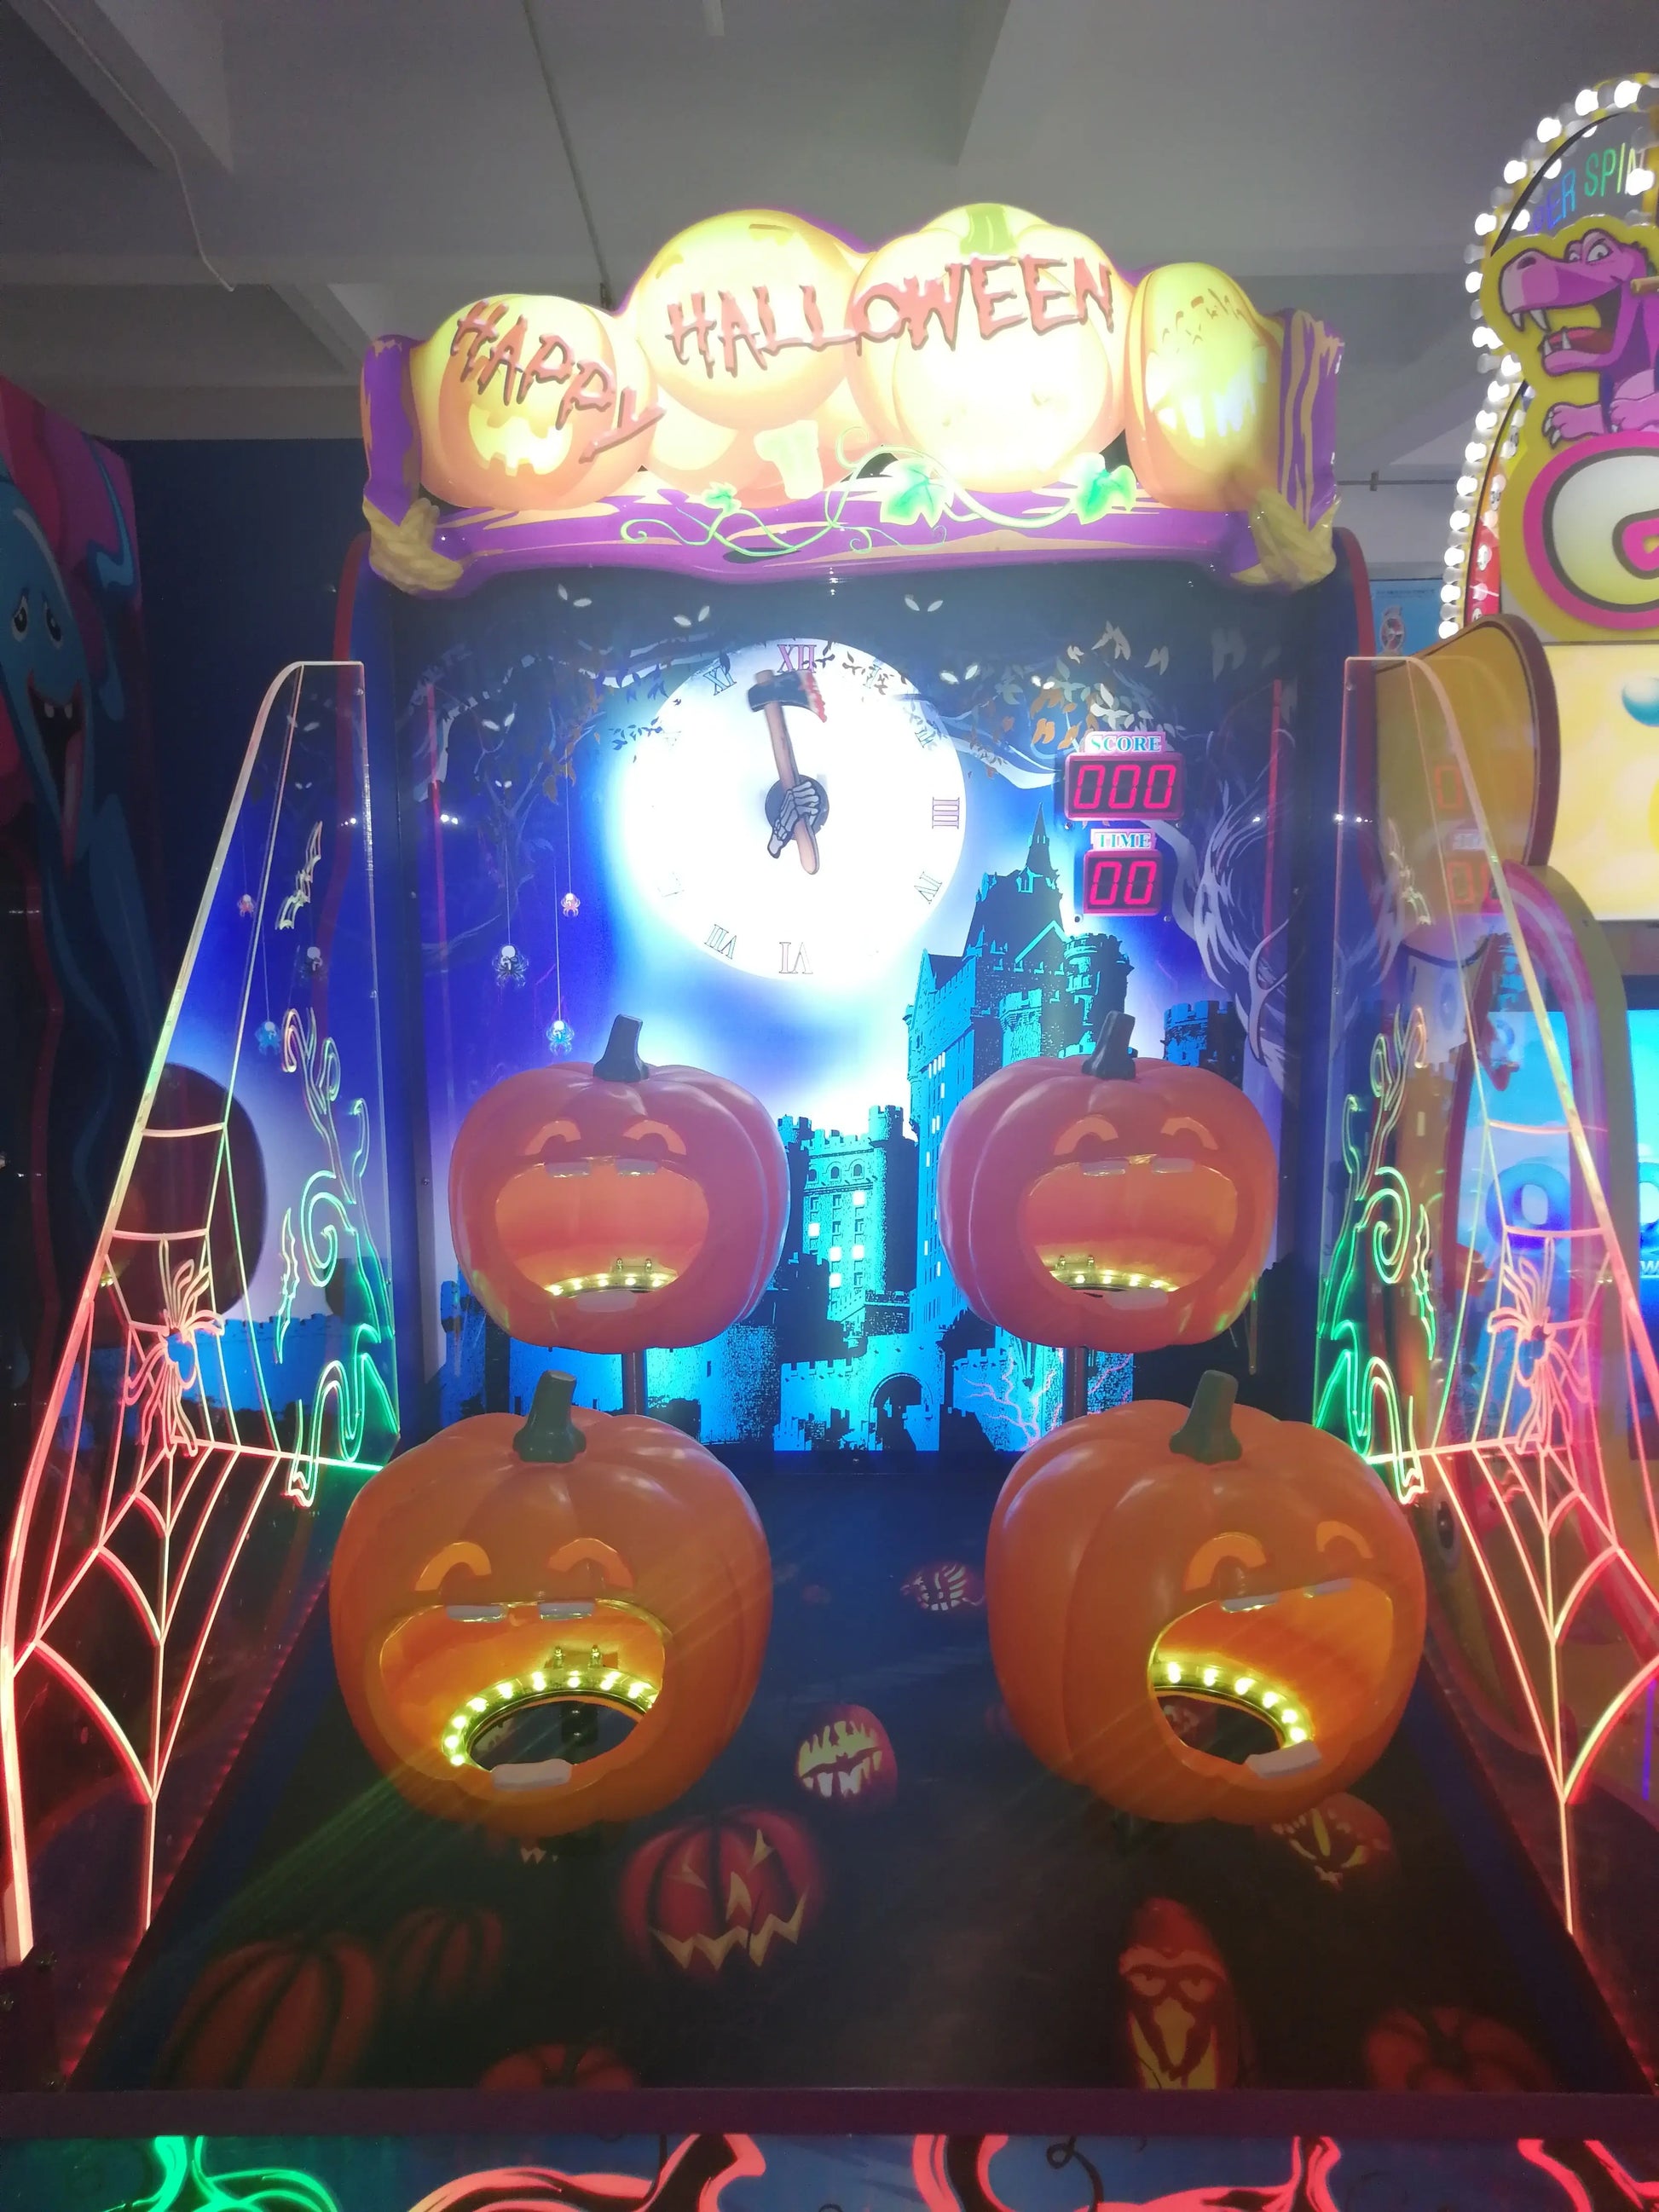 Happy-Halloween-Lottery-Redemption-game-machine-Amusement-Coin-Operated-Ticket-Redemption-Electronic-games-for-kids-Tomy-Arcade